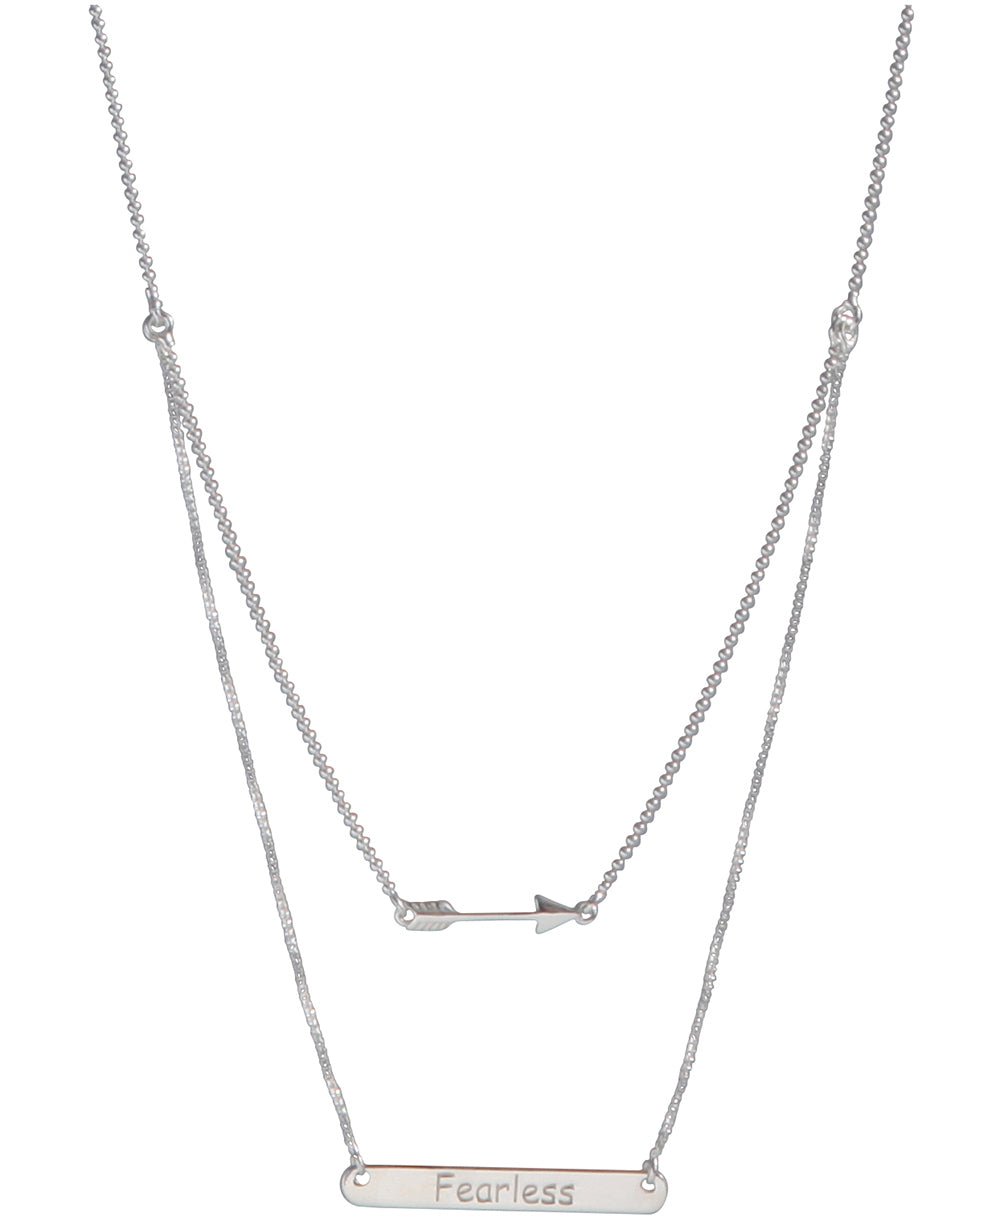 Inspirational Sterling Silver Layer Necklace, Fearless - Meaningful Jewelry